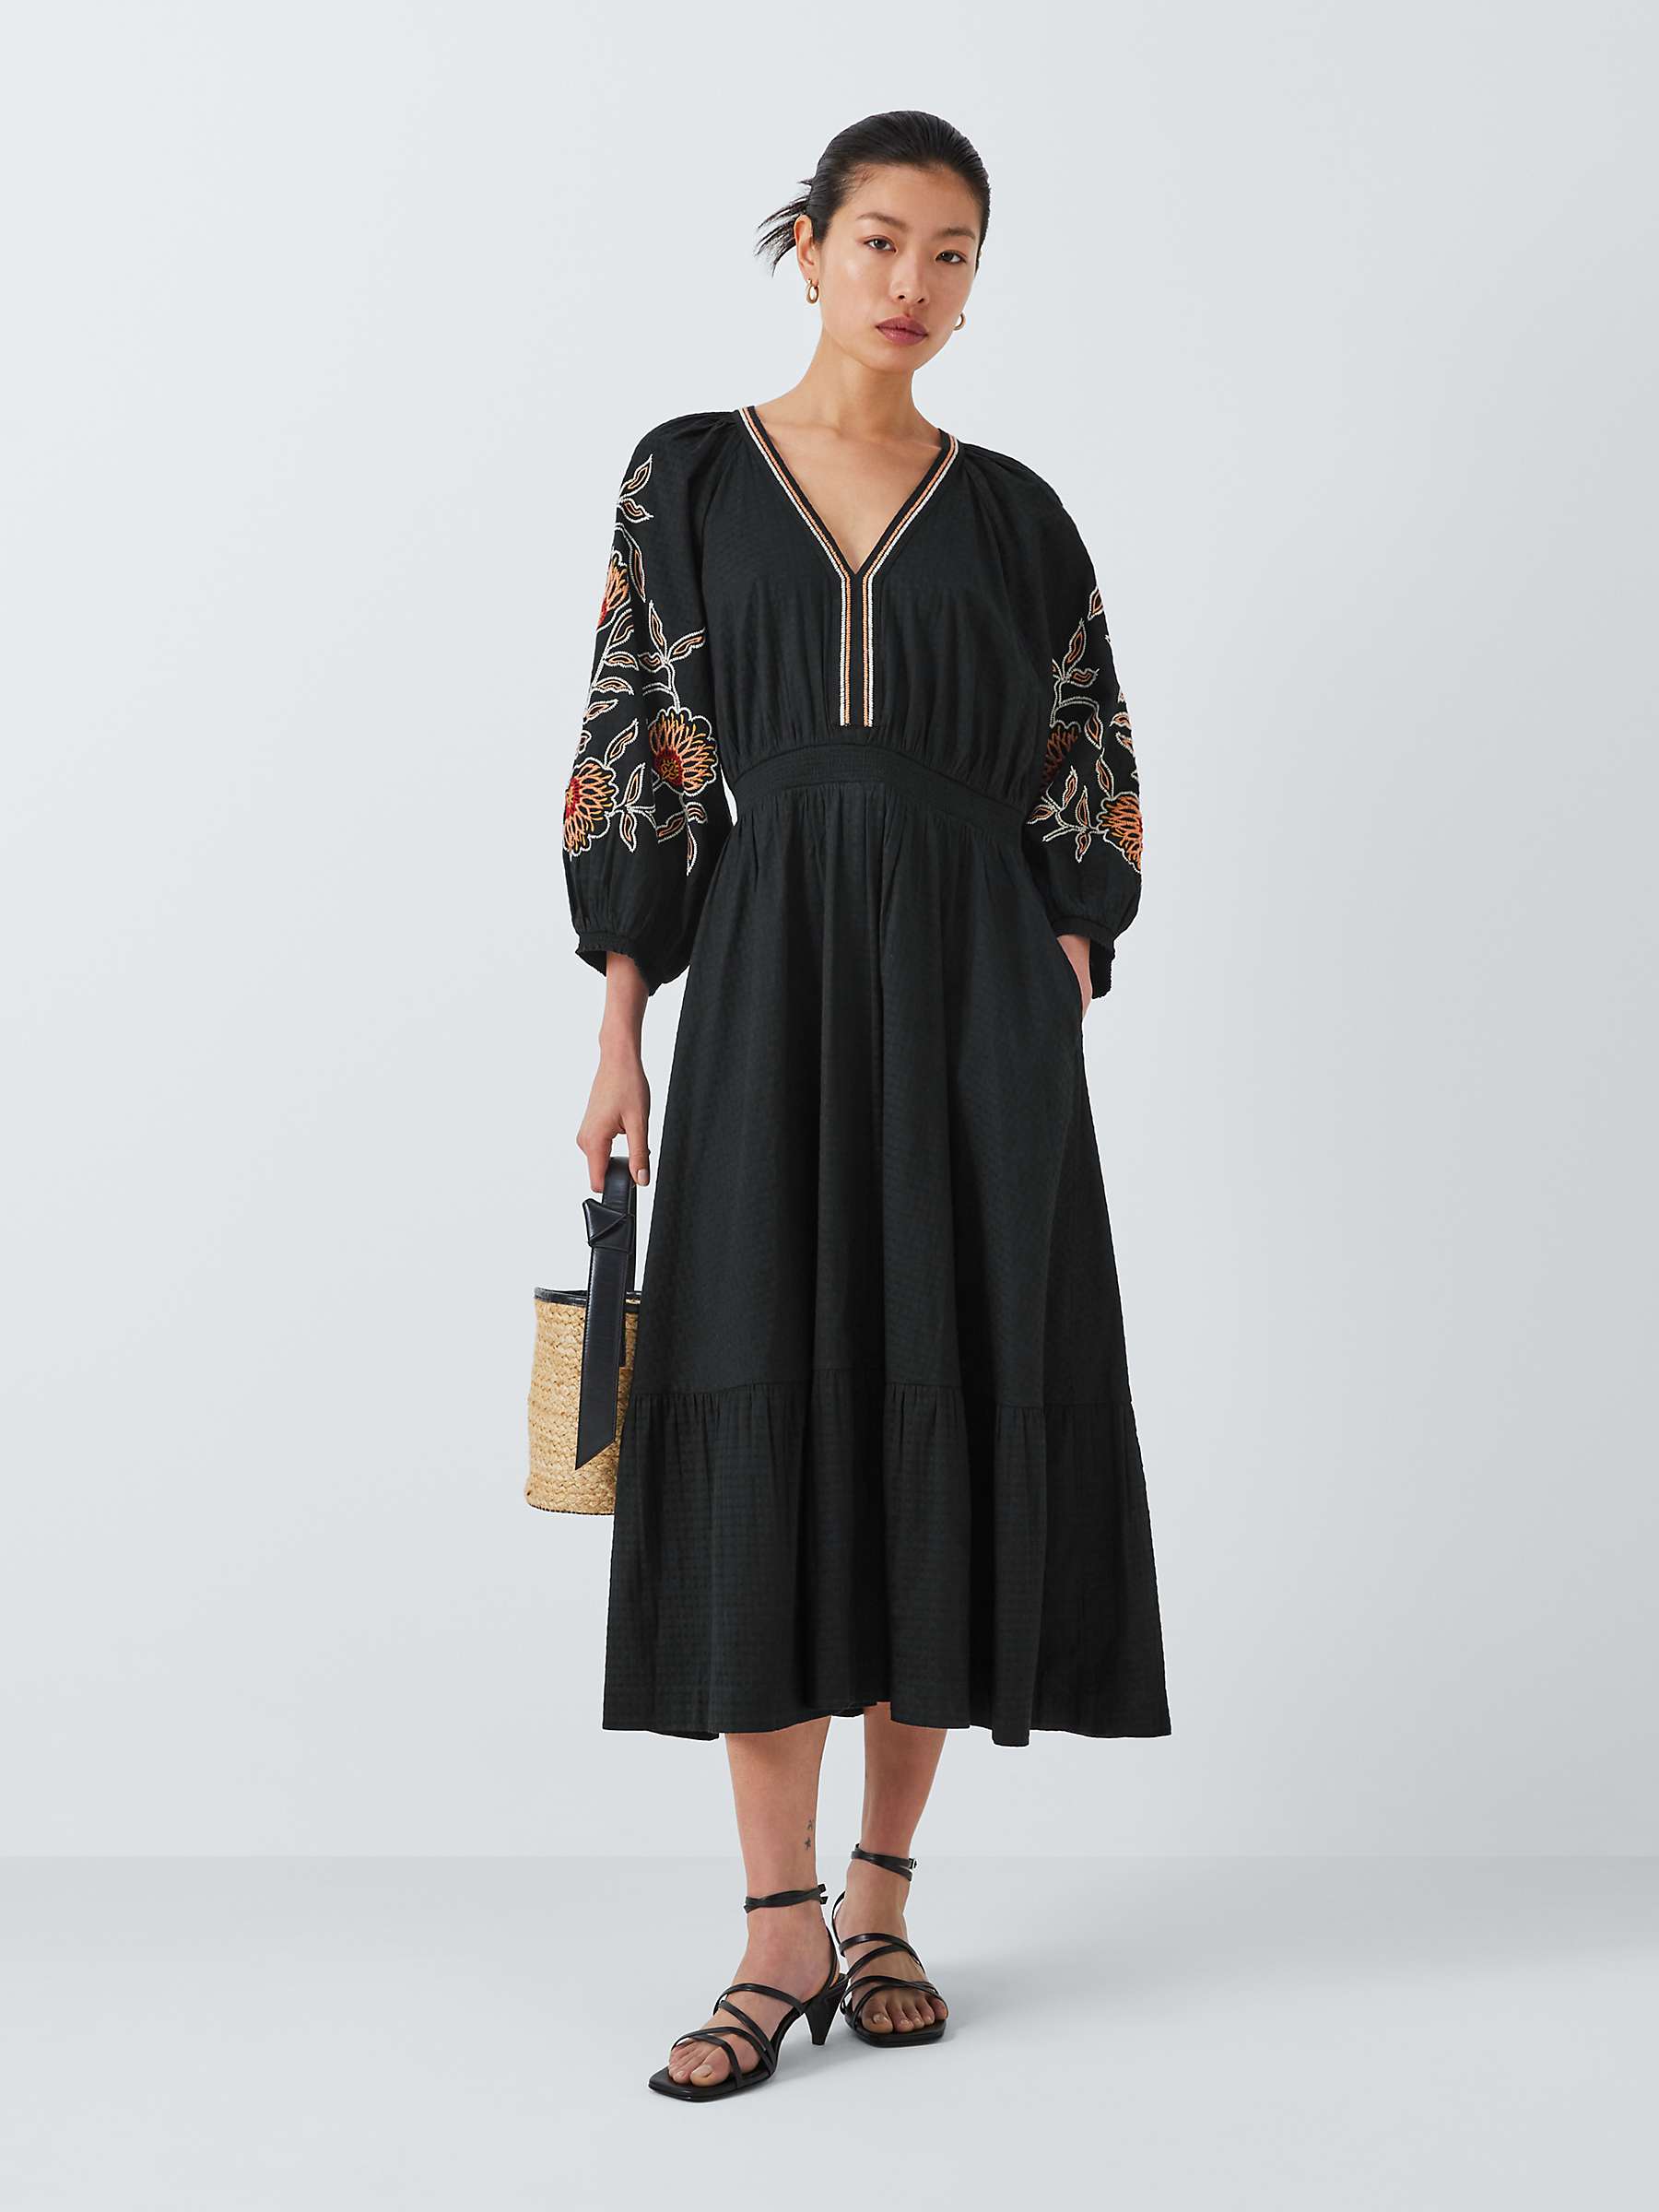 Buy AND/OR Nirvana Embroidered Dress, Black Online at johnlewis.com